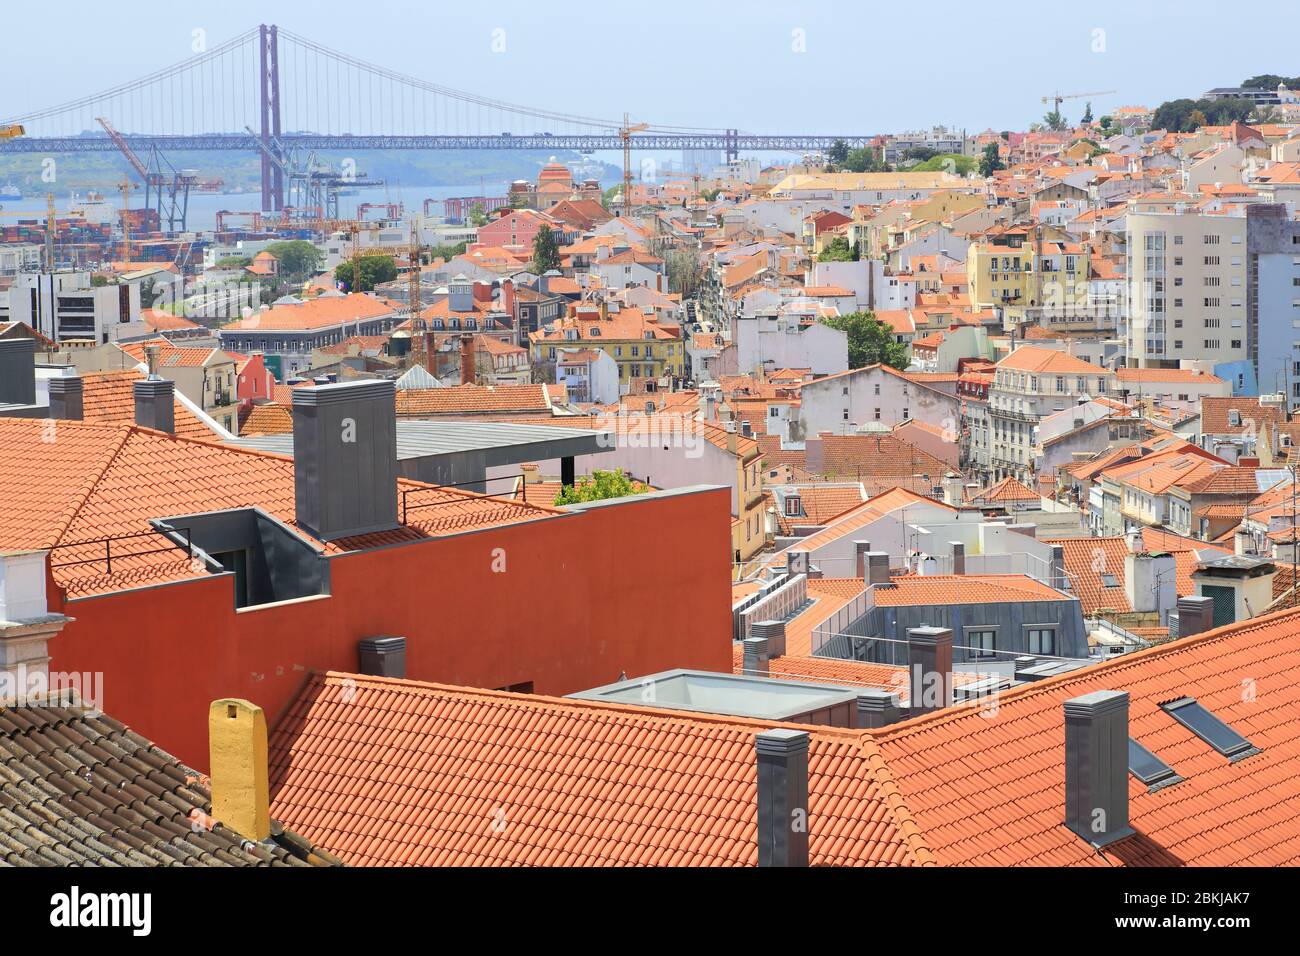 Portugal, Lisbon, view from Bairro Alto on the Lapa district with the Tagus river and the April 25 bridge in the background Stock Photo